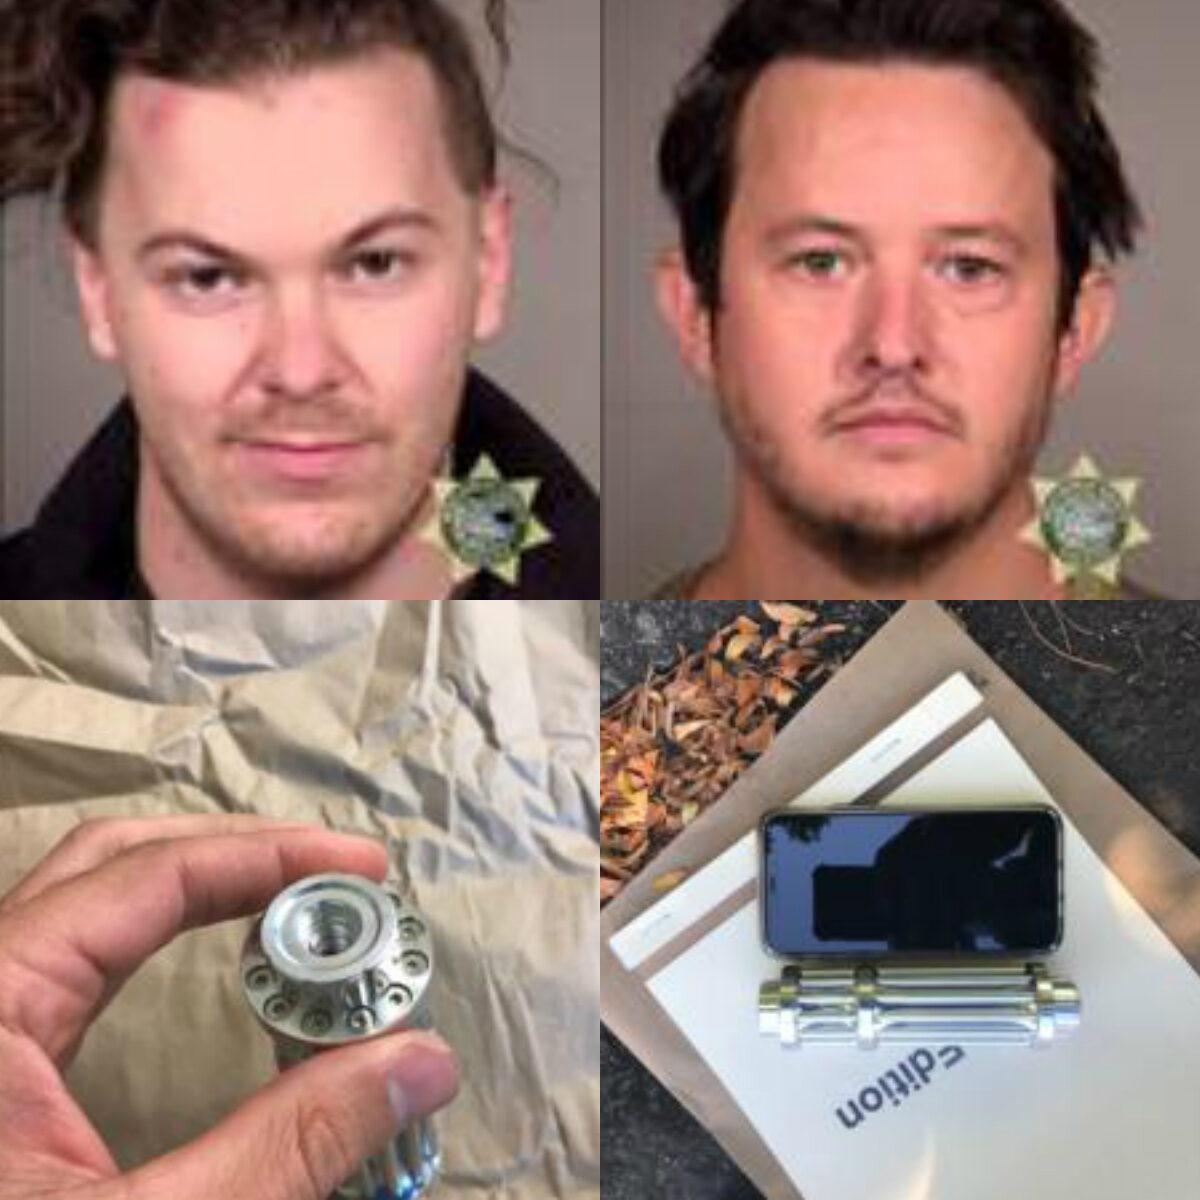 Adam Layee (top L) and Bryan Kelley (top R) were charged for participating in riots in Portland, Ore., on various dates this year. On bottom is the laser Kelley allegedly shined in the eyes of police officers. (Multnomah County Sheriff's Office and Portland Police Bureau)